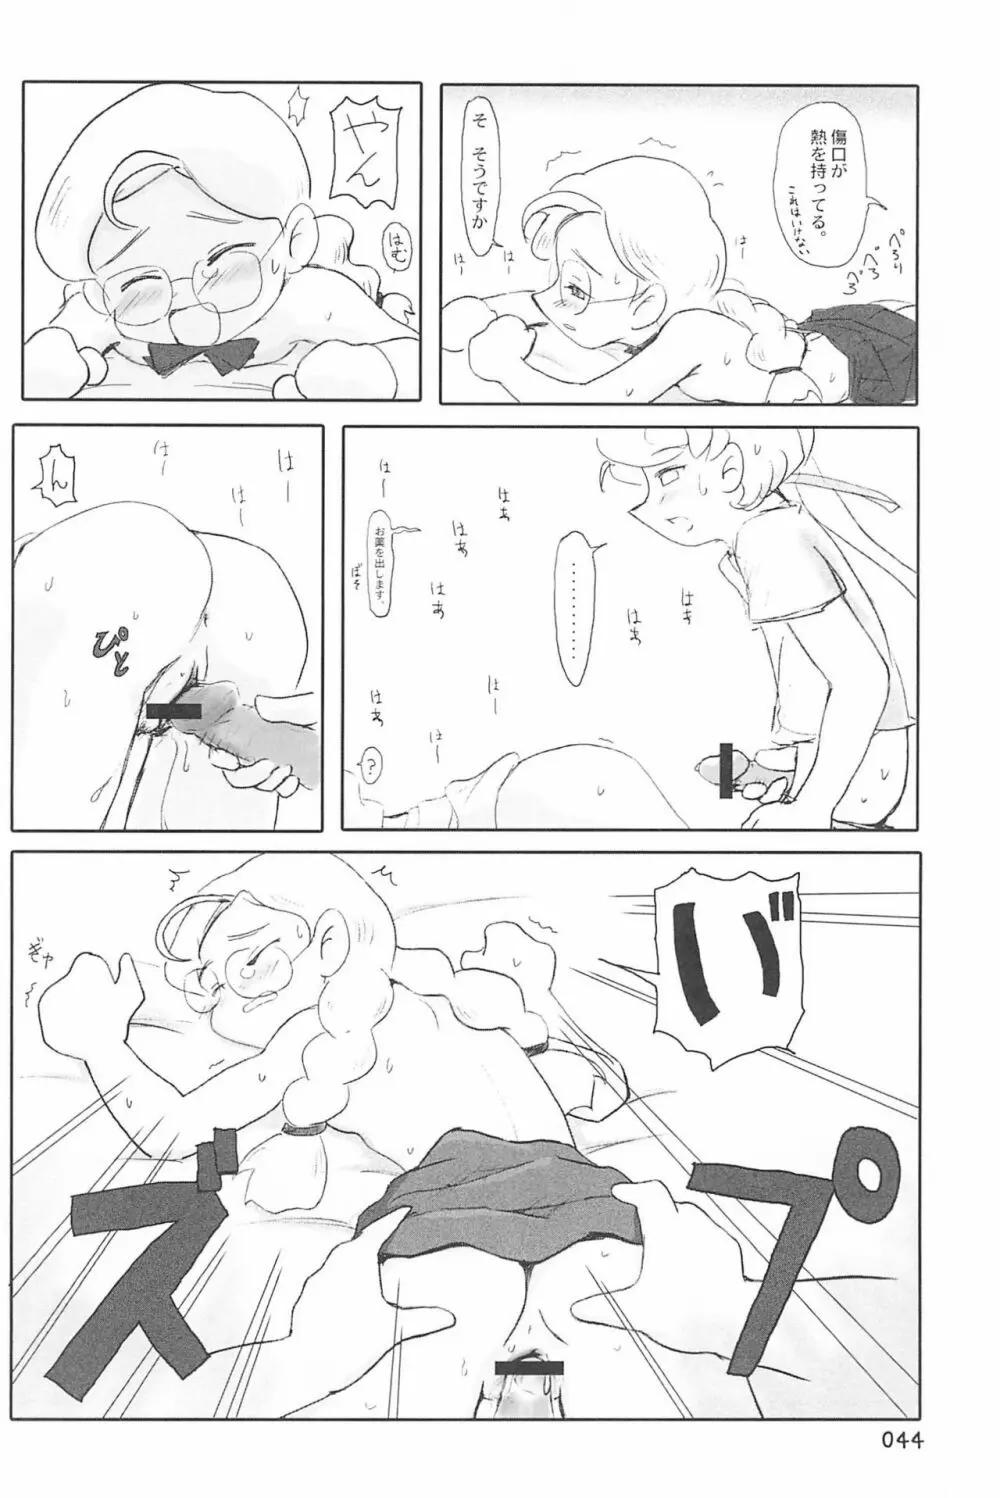 ND-special Volume 4 44ページ